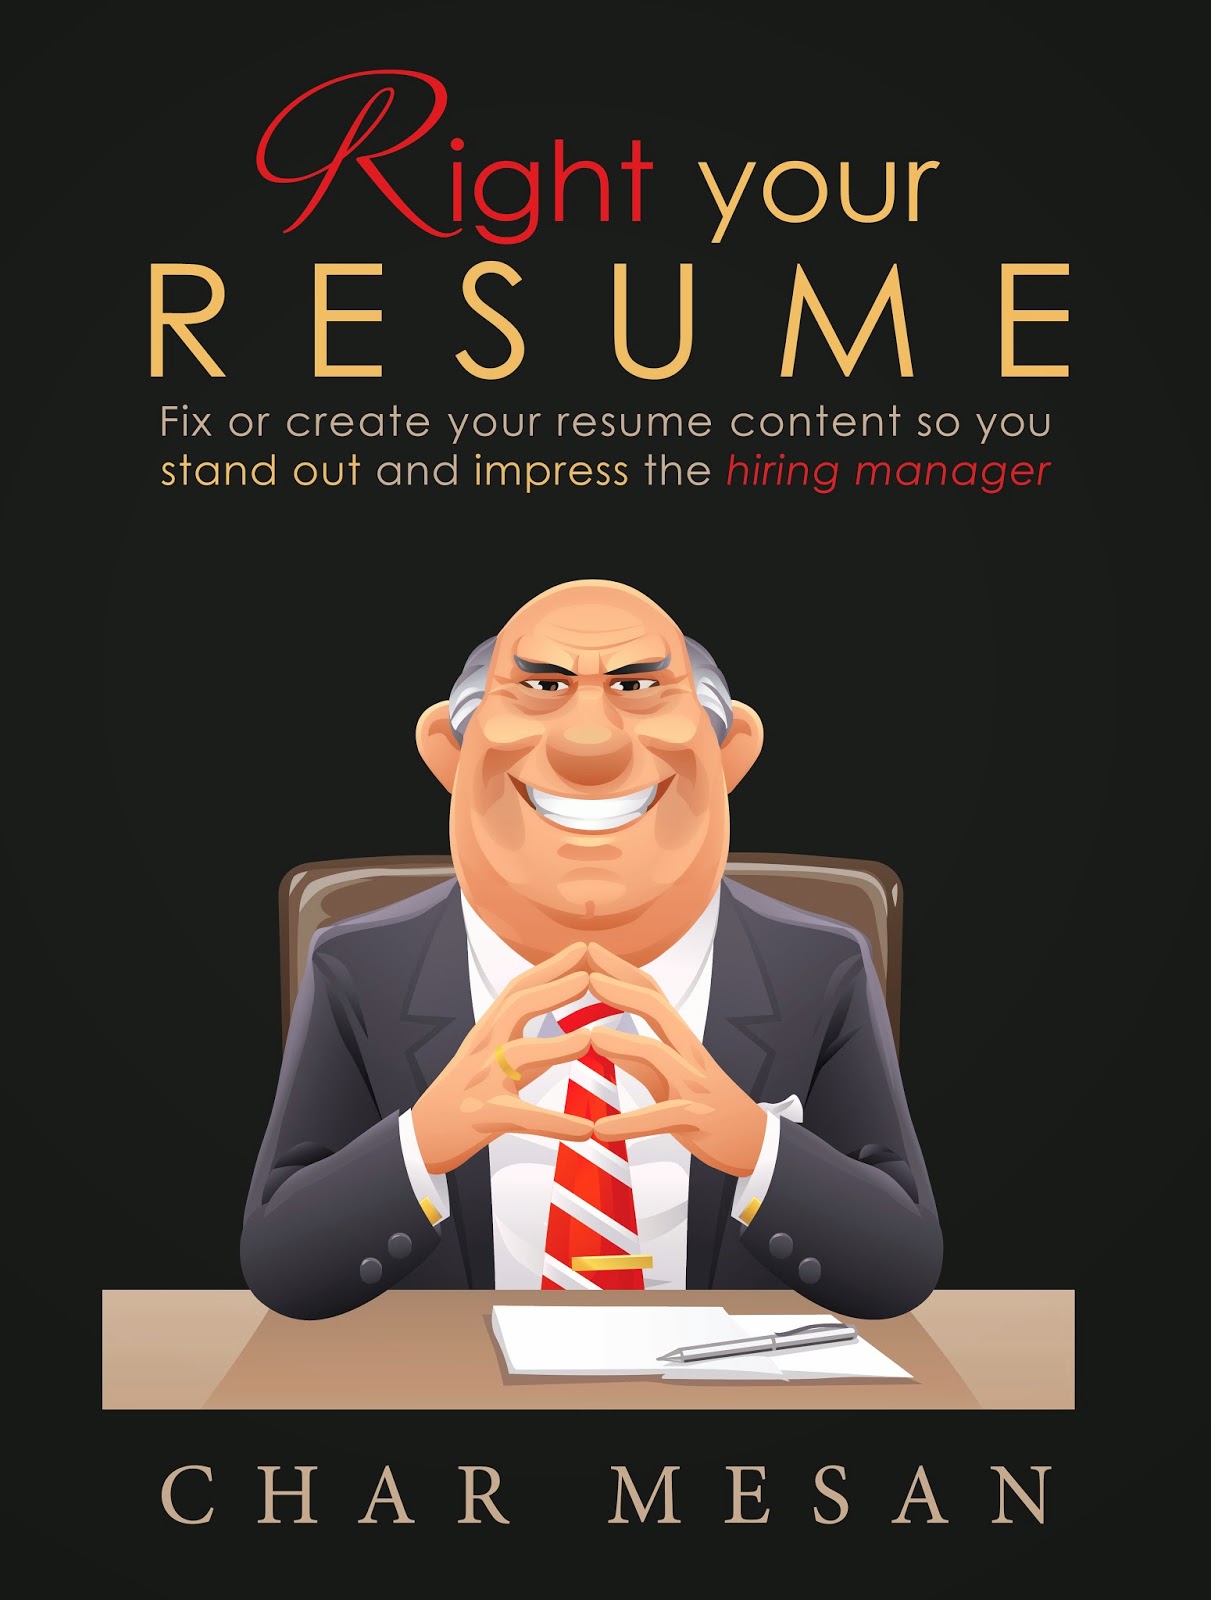 Check out Right Your Resume now